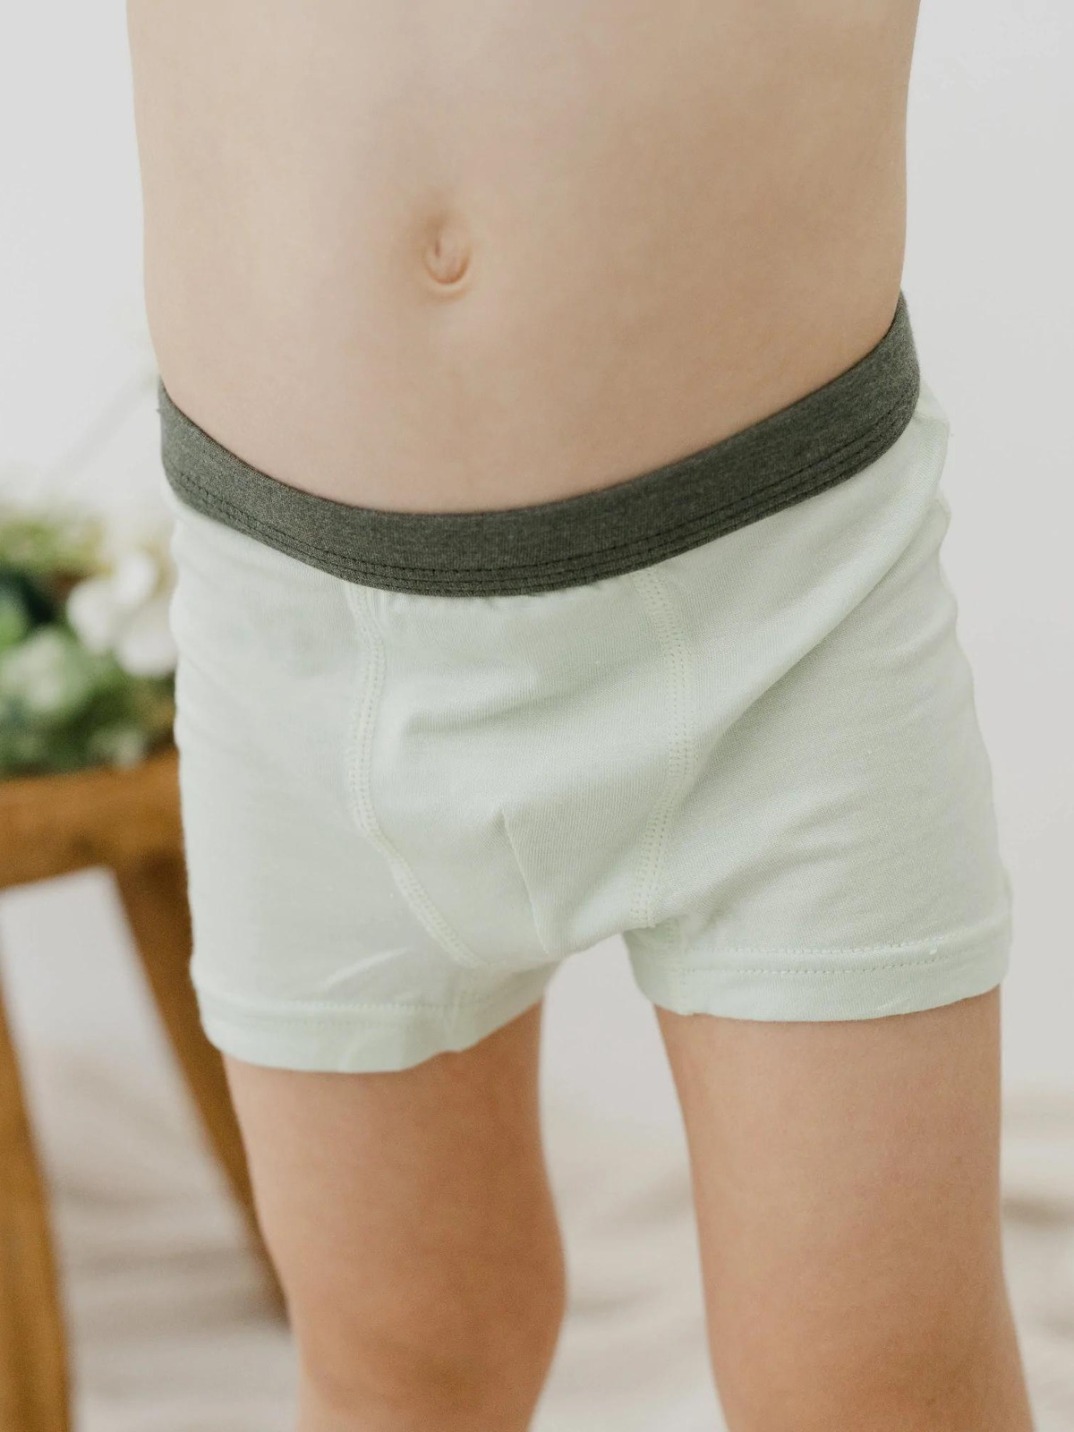 Boxer Briefs for Kids Trendy Sustainable fashion Just Peachy Boxer Briefs are super soft and gentle on your little ones' skin. Designed with a snug fit for play, movement and a comfy night's rest. Made with Lenzing® TENCEL™ Micro Modal Fibers interwoven with Eco Soft Technology exclusively for Just Peachy. 